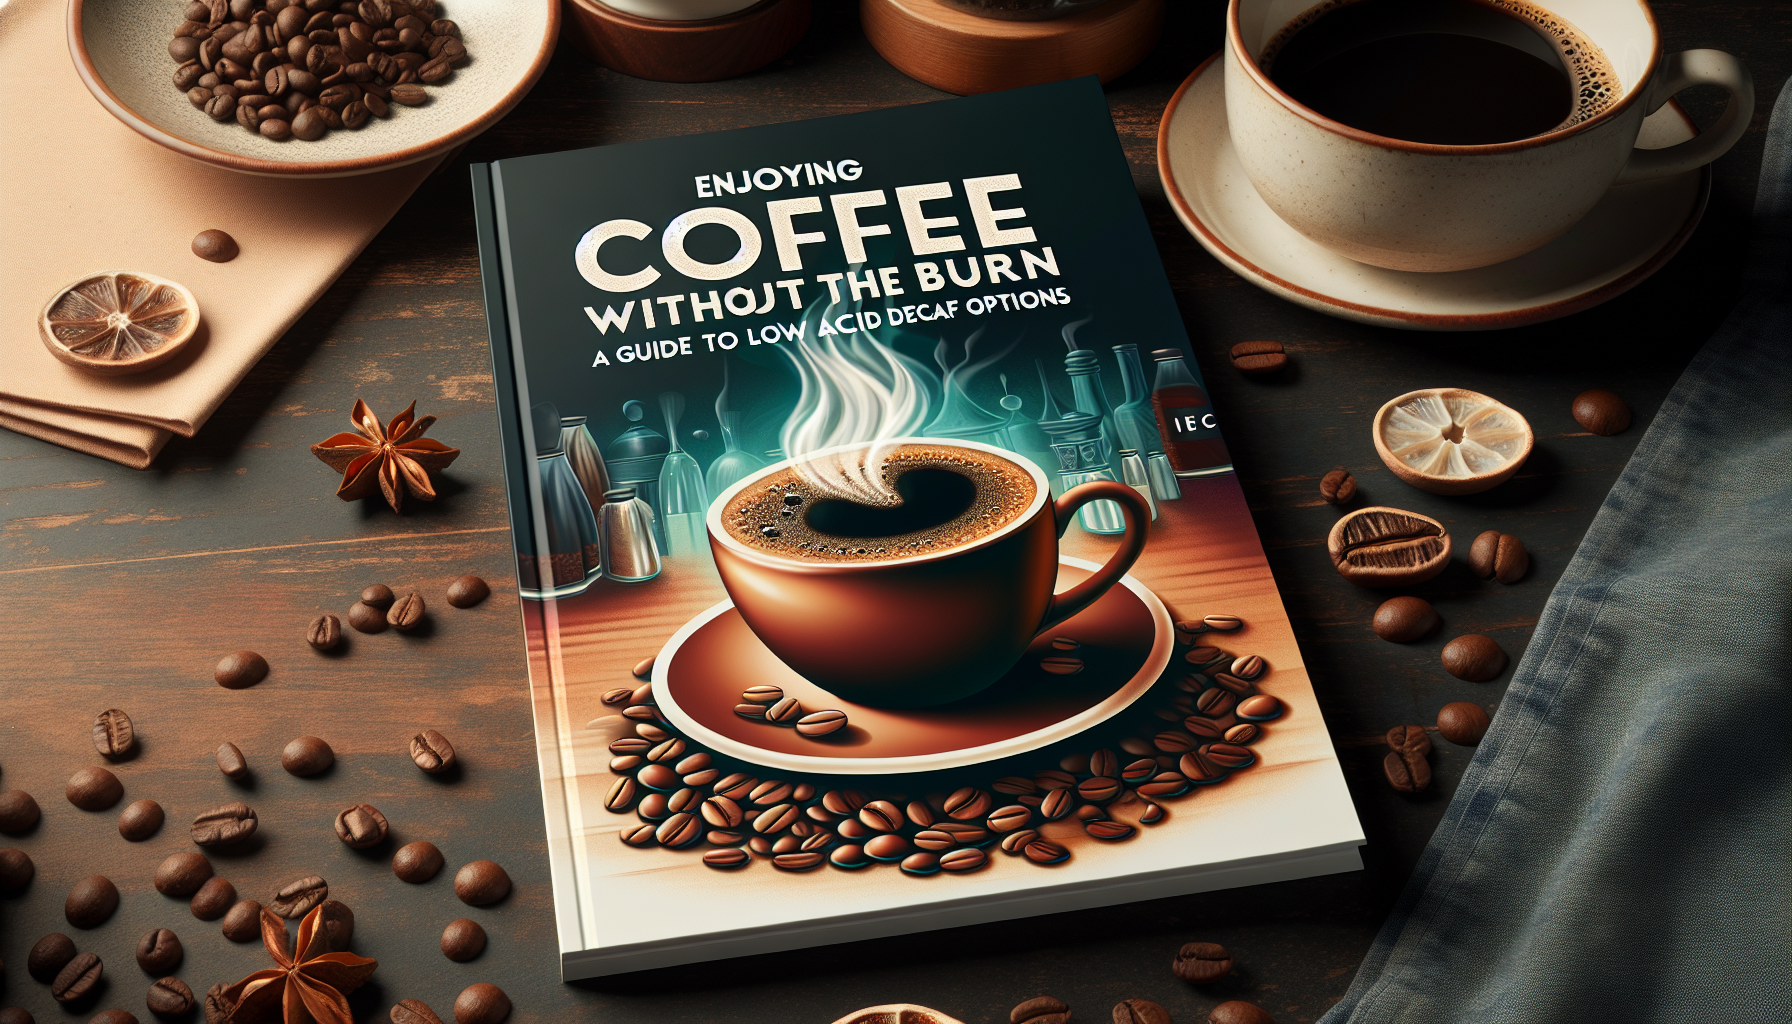 An engaging cover page for a coffee guide. The title of the book says 'Enjoying Coffee without the Burn: A Guide to Low Acid Decaf Options'. This scene is set in a cozy coffee shop with a calm ambianc